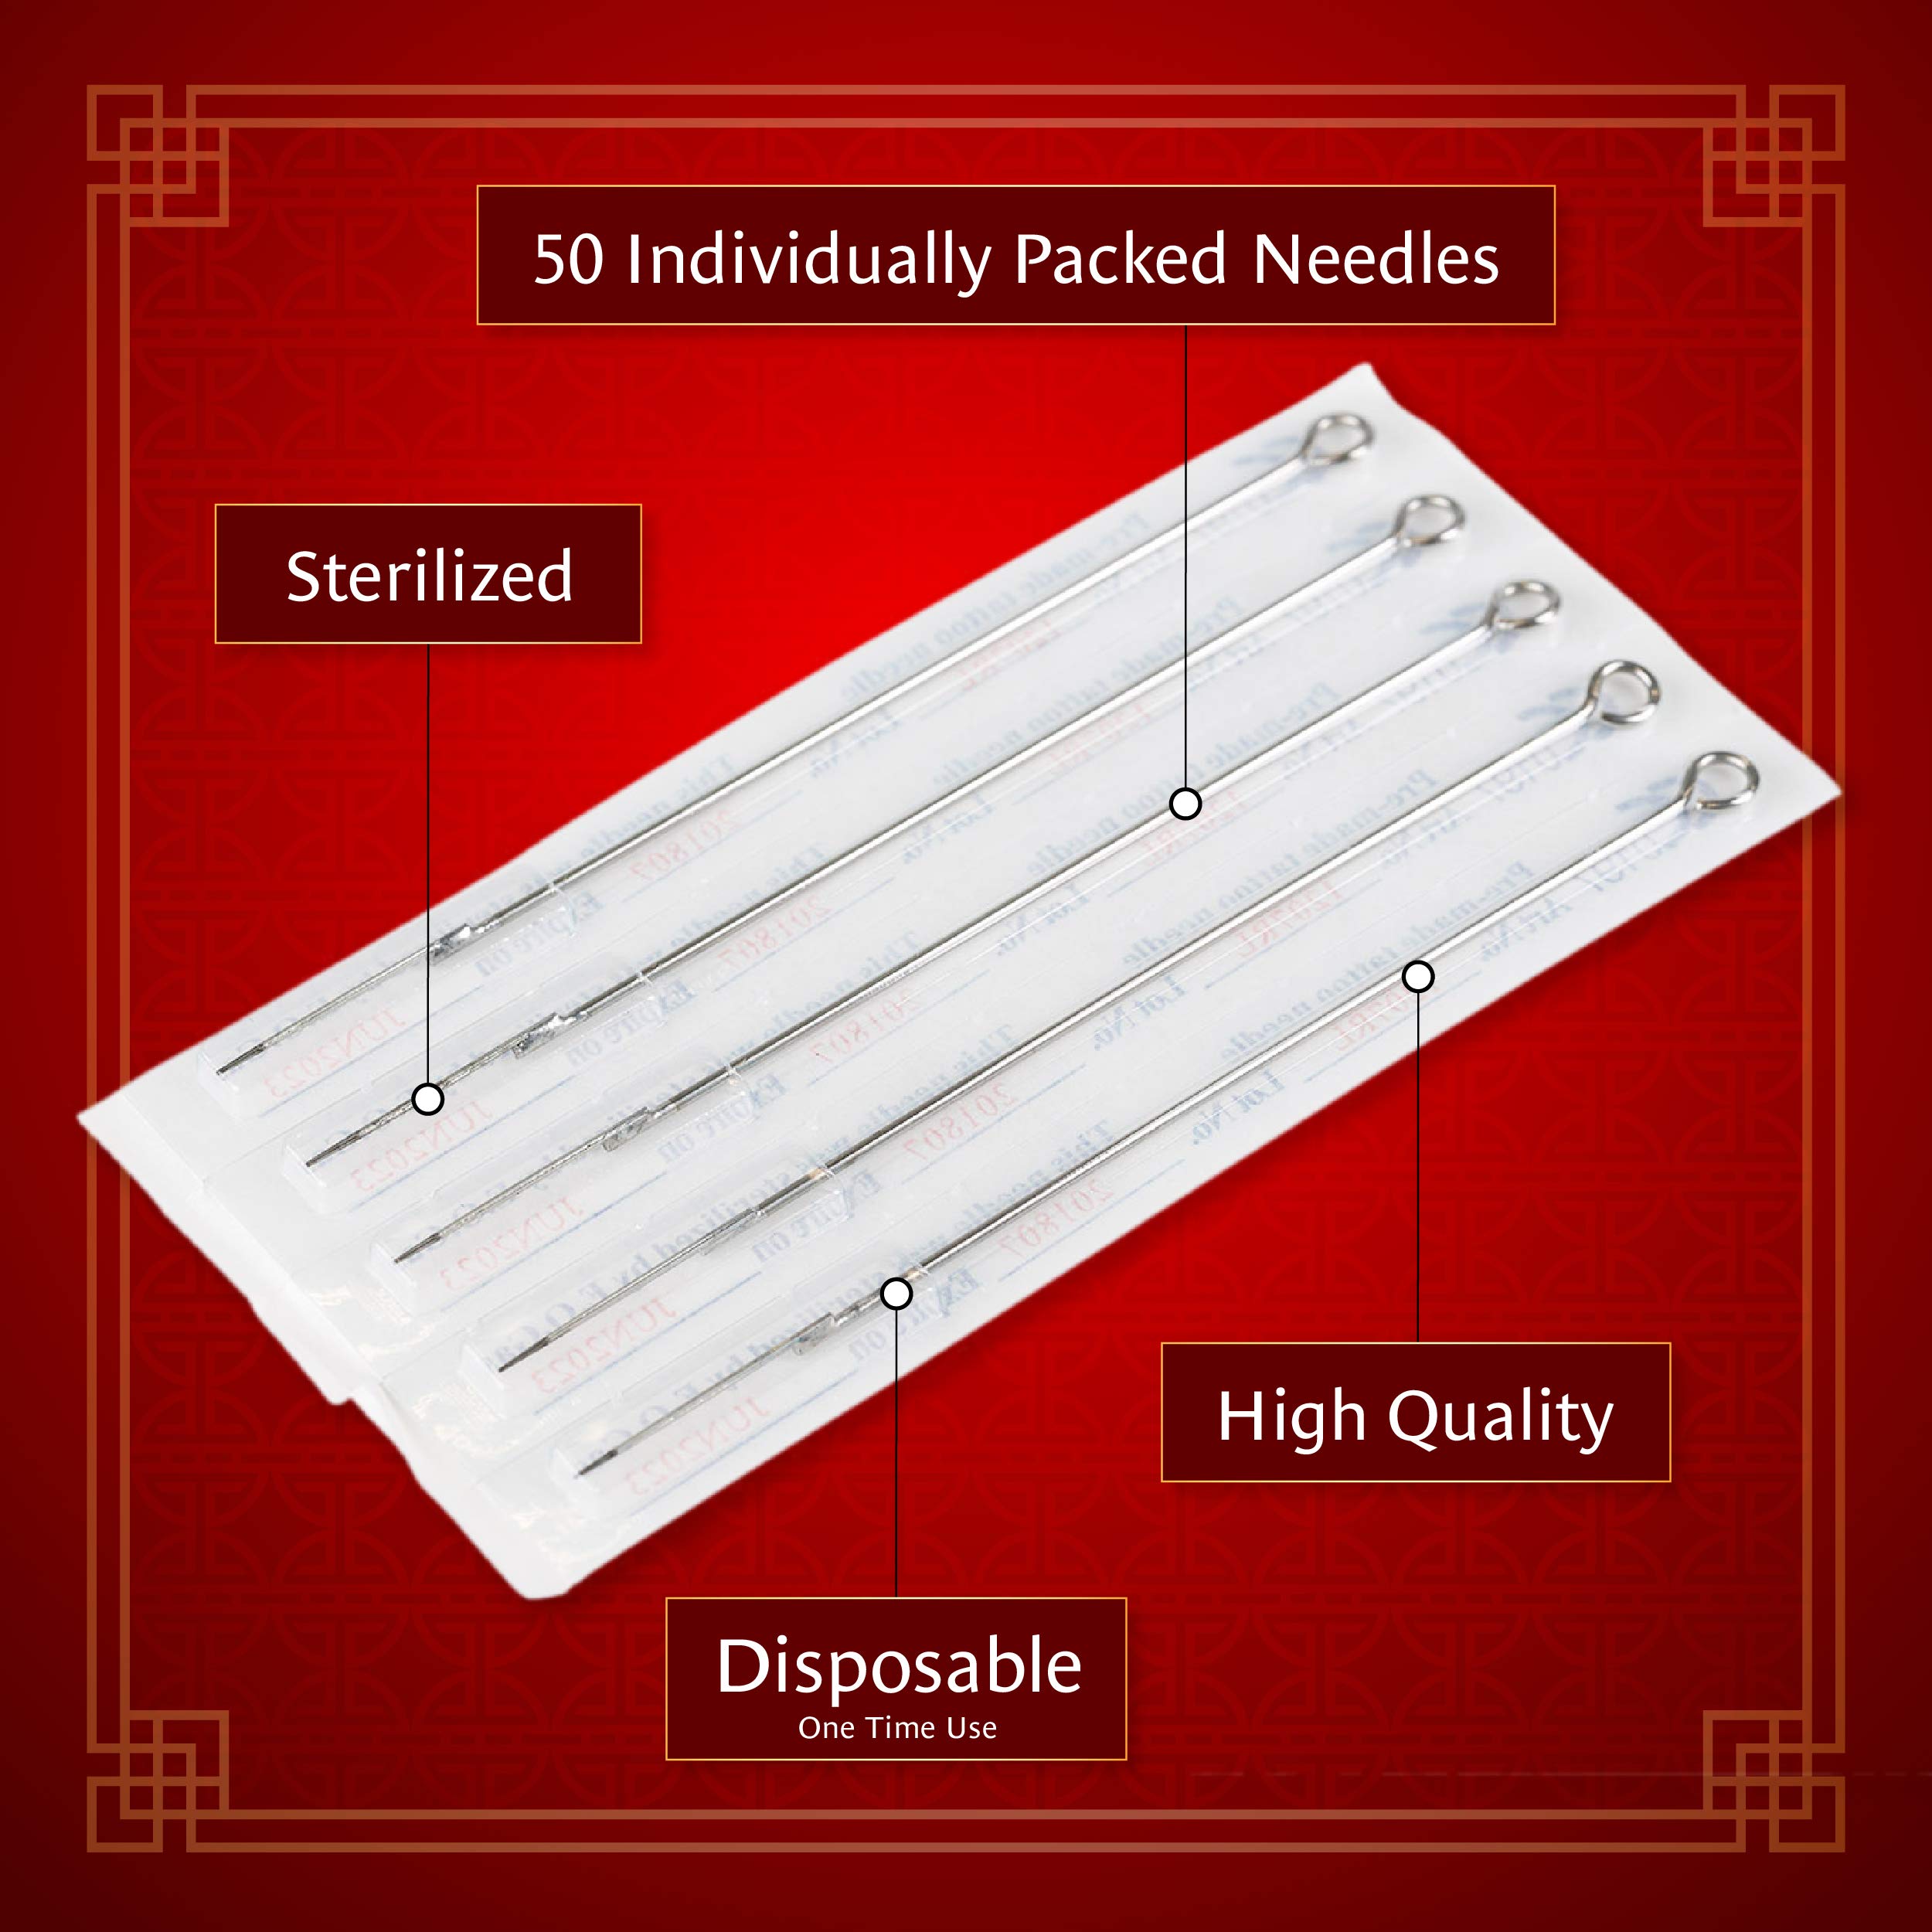 One Tattoo World 50-pcs Sterilized Tattoo Needles Individually Packed 3RL Round Liner, Perfect Precisions, Great for Stick and Poke Tattoos | OTW-50-3RL.1